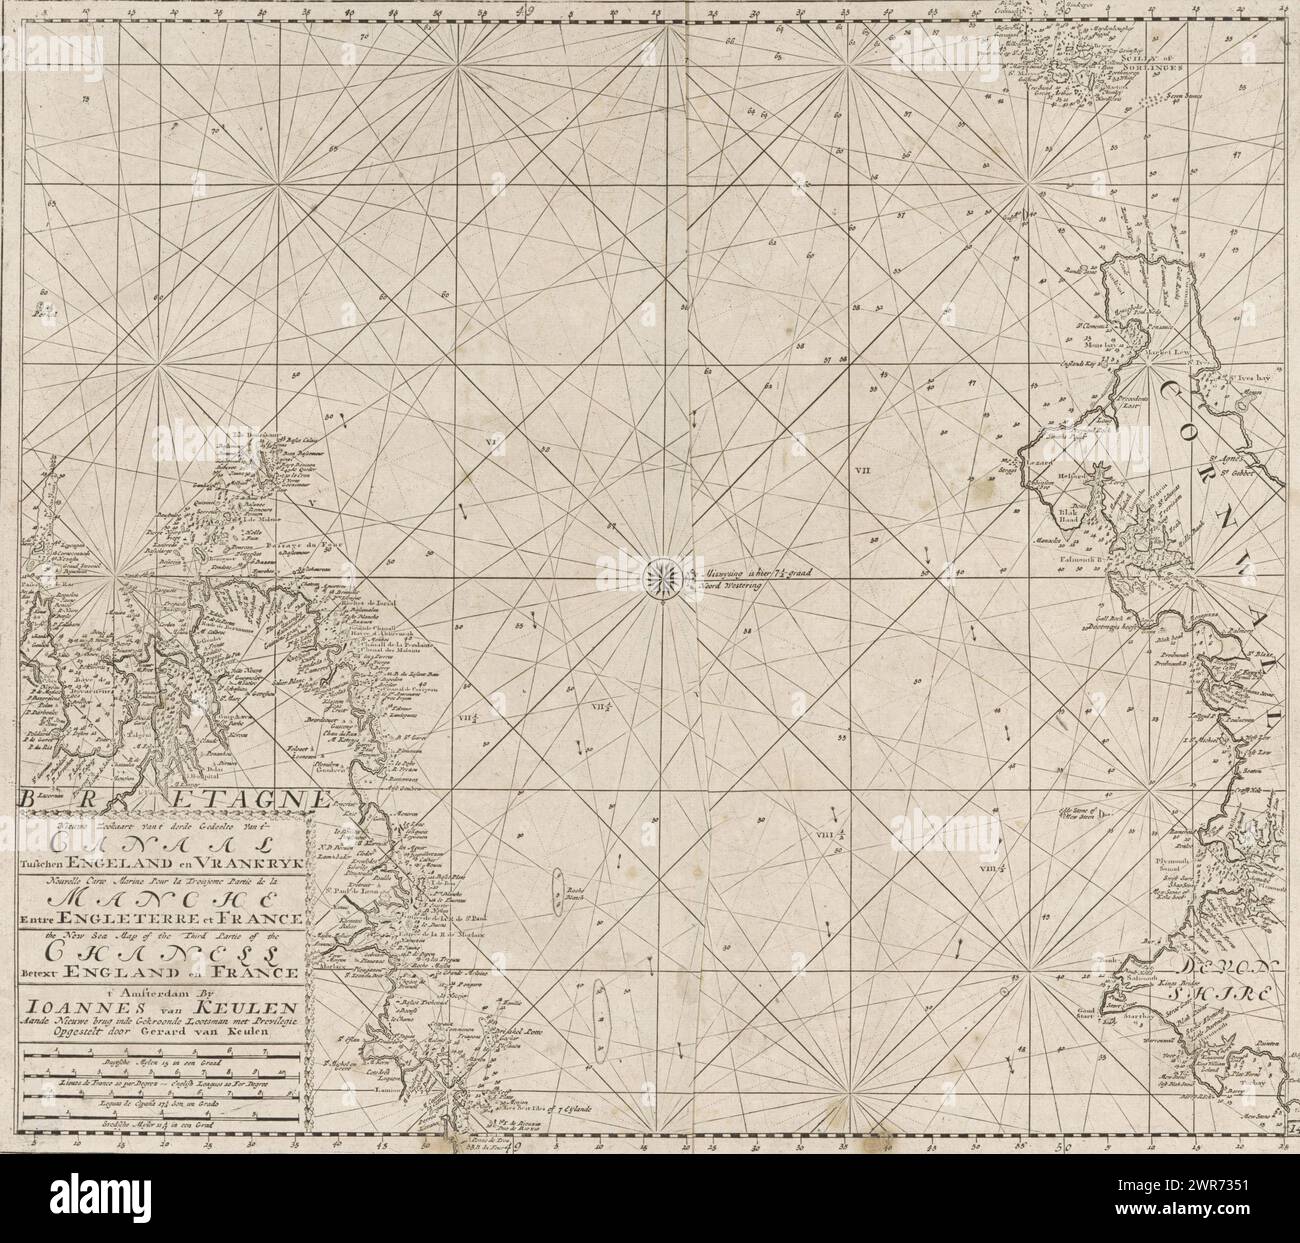 Pass map of the Channel between England and France, part 3, New Nautical Chart of the third Part of the Canal Between England and France (title on object), Pass map of a part of the Channel, the strait between Great Britain and France, with a compass rose. Bottom left a cartouche with the title, the address of the publisher and the scale., print maker: anonymous, after design by: Gerard van Keulen, publisher: Johannes van Keulen (I), Amsterdam, 1688 - 1803, paper, engraving, etching, height 523 mm × width 615 mm, print Stock Photo